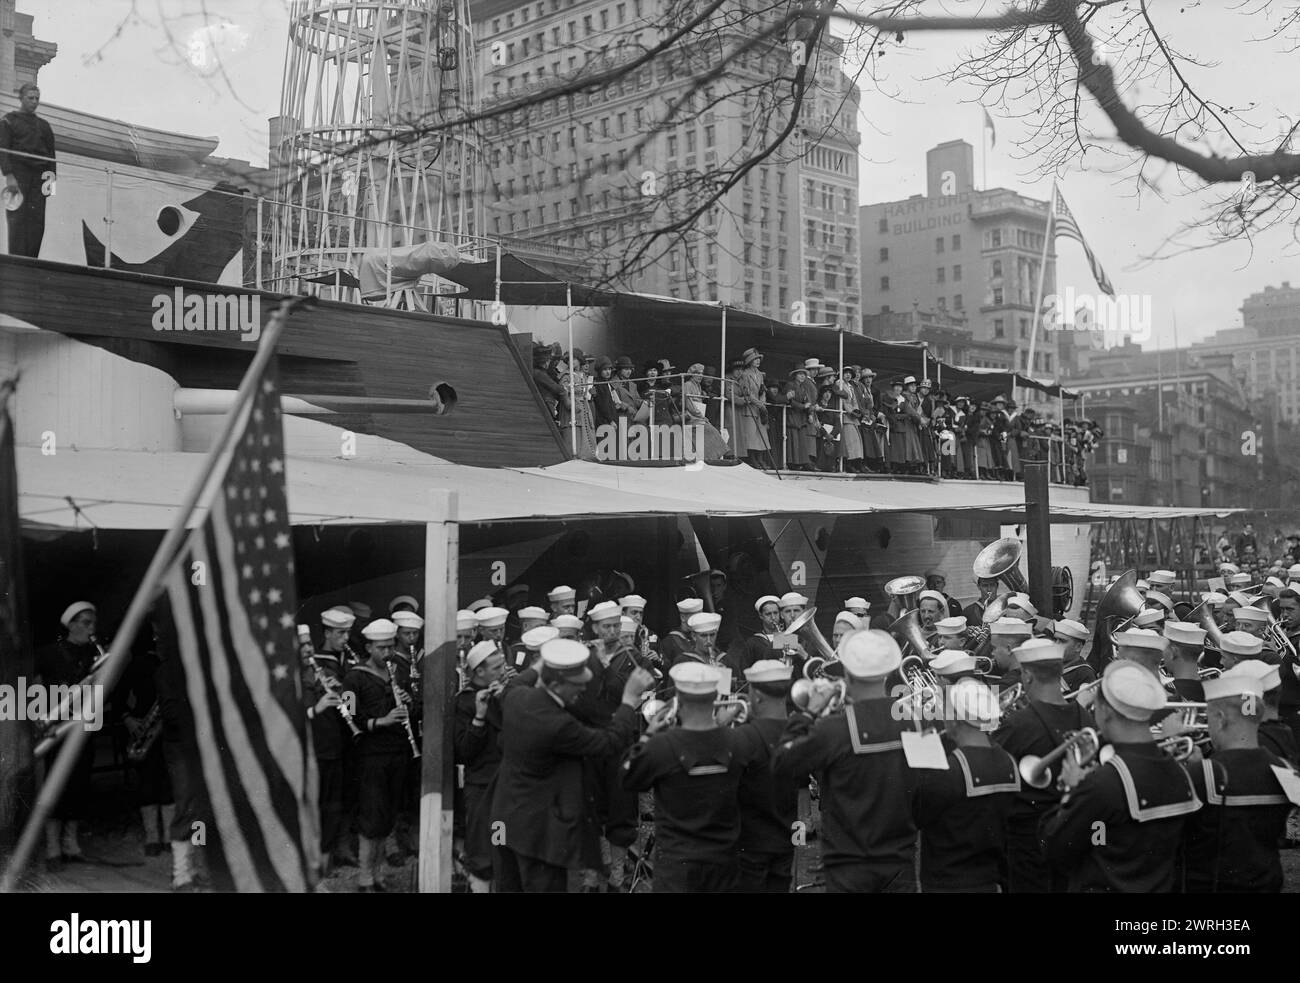 French women on RECRUIT, 1917 or 1918. A military band playing next to the USS Recruit, a wooden mockup of a battleship built in Union Square, New York City by the Navy to recruit seamen and sell Liberty Bonds during World War I. French women stand on deck. Stock Photo